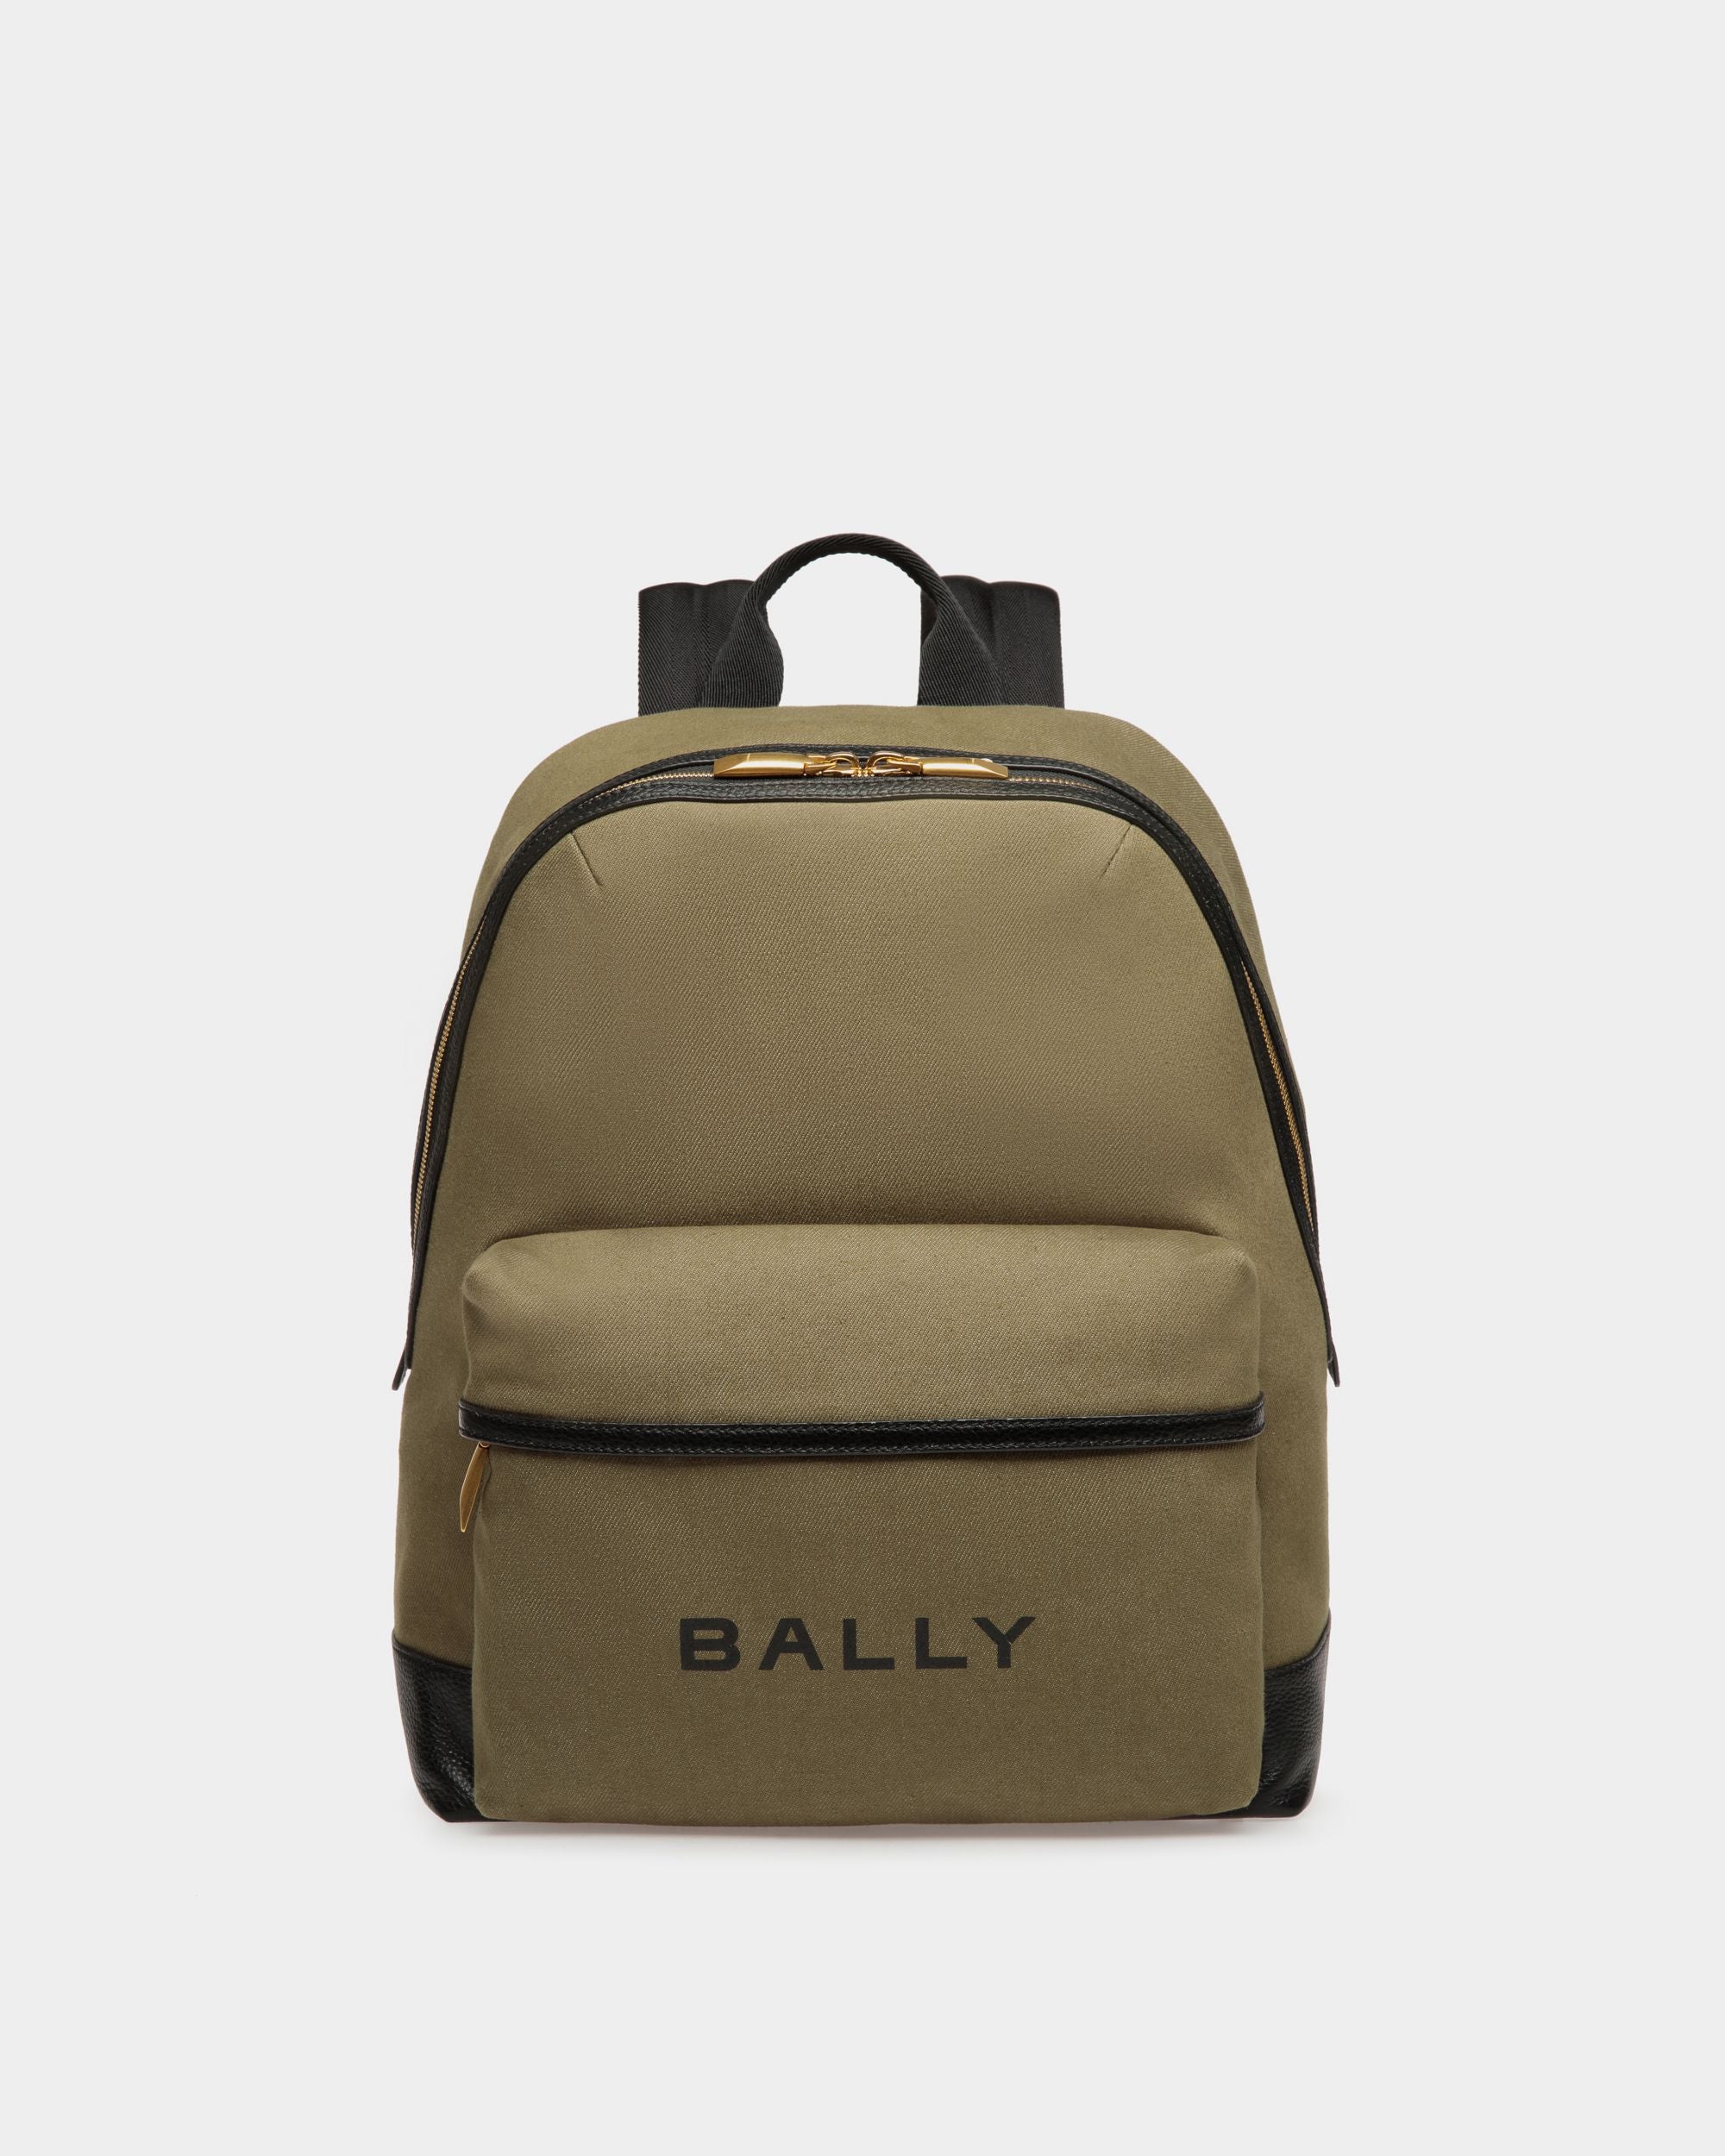 Bar | Men's Backpack in Green Canvas And Black Leather | Bally | Still Life Front